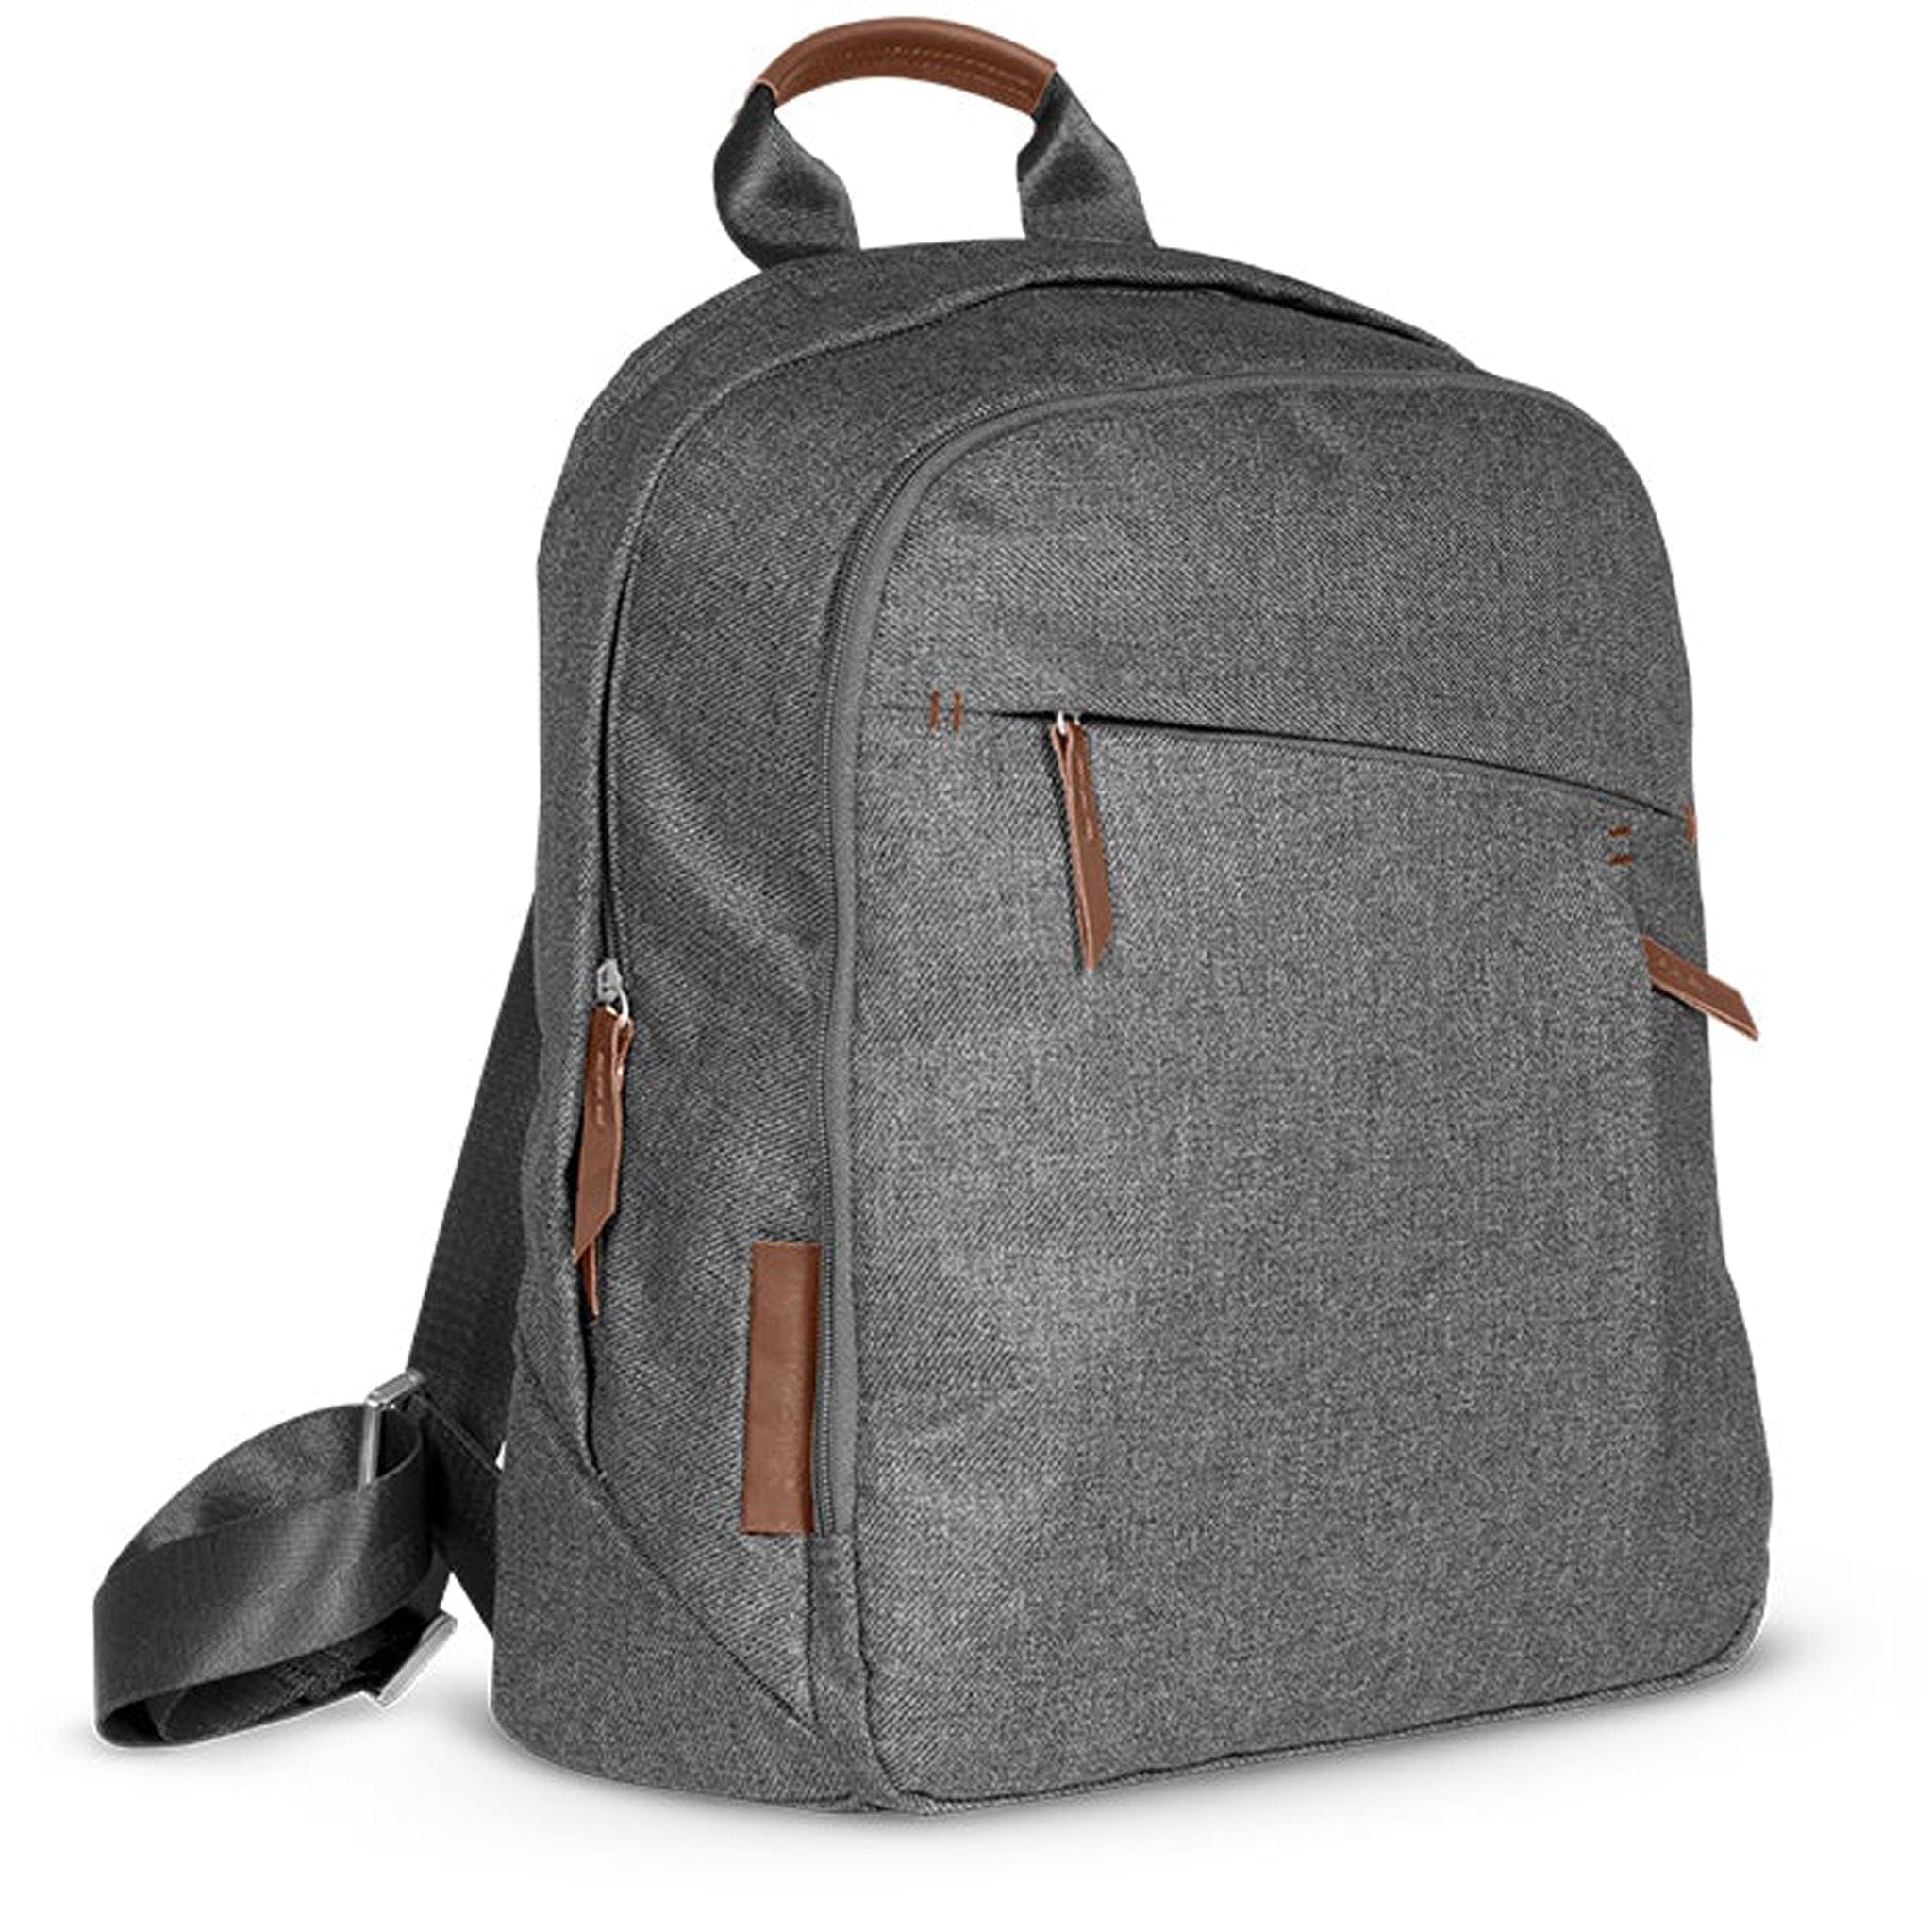 Uppababy Changing Backpack Greyson Changing Bags 0919-DPB-WW-GRY 0810030094135